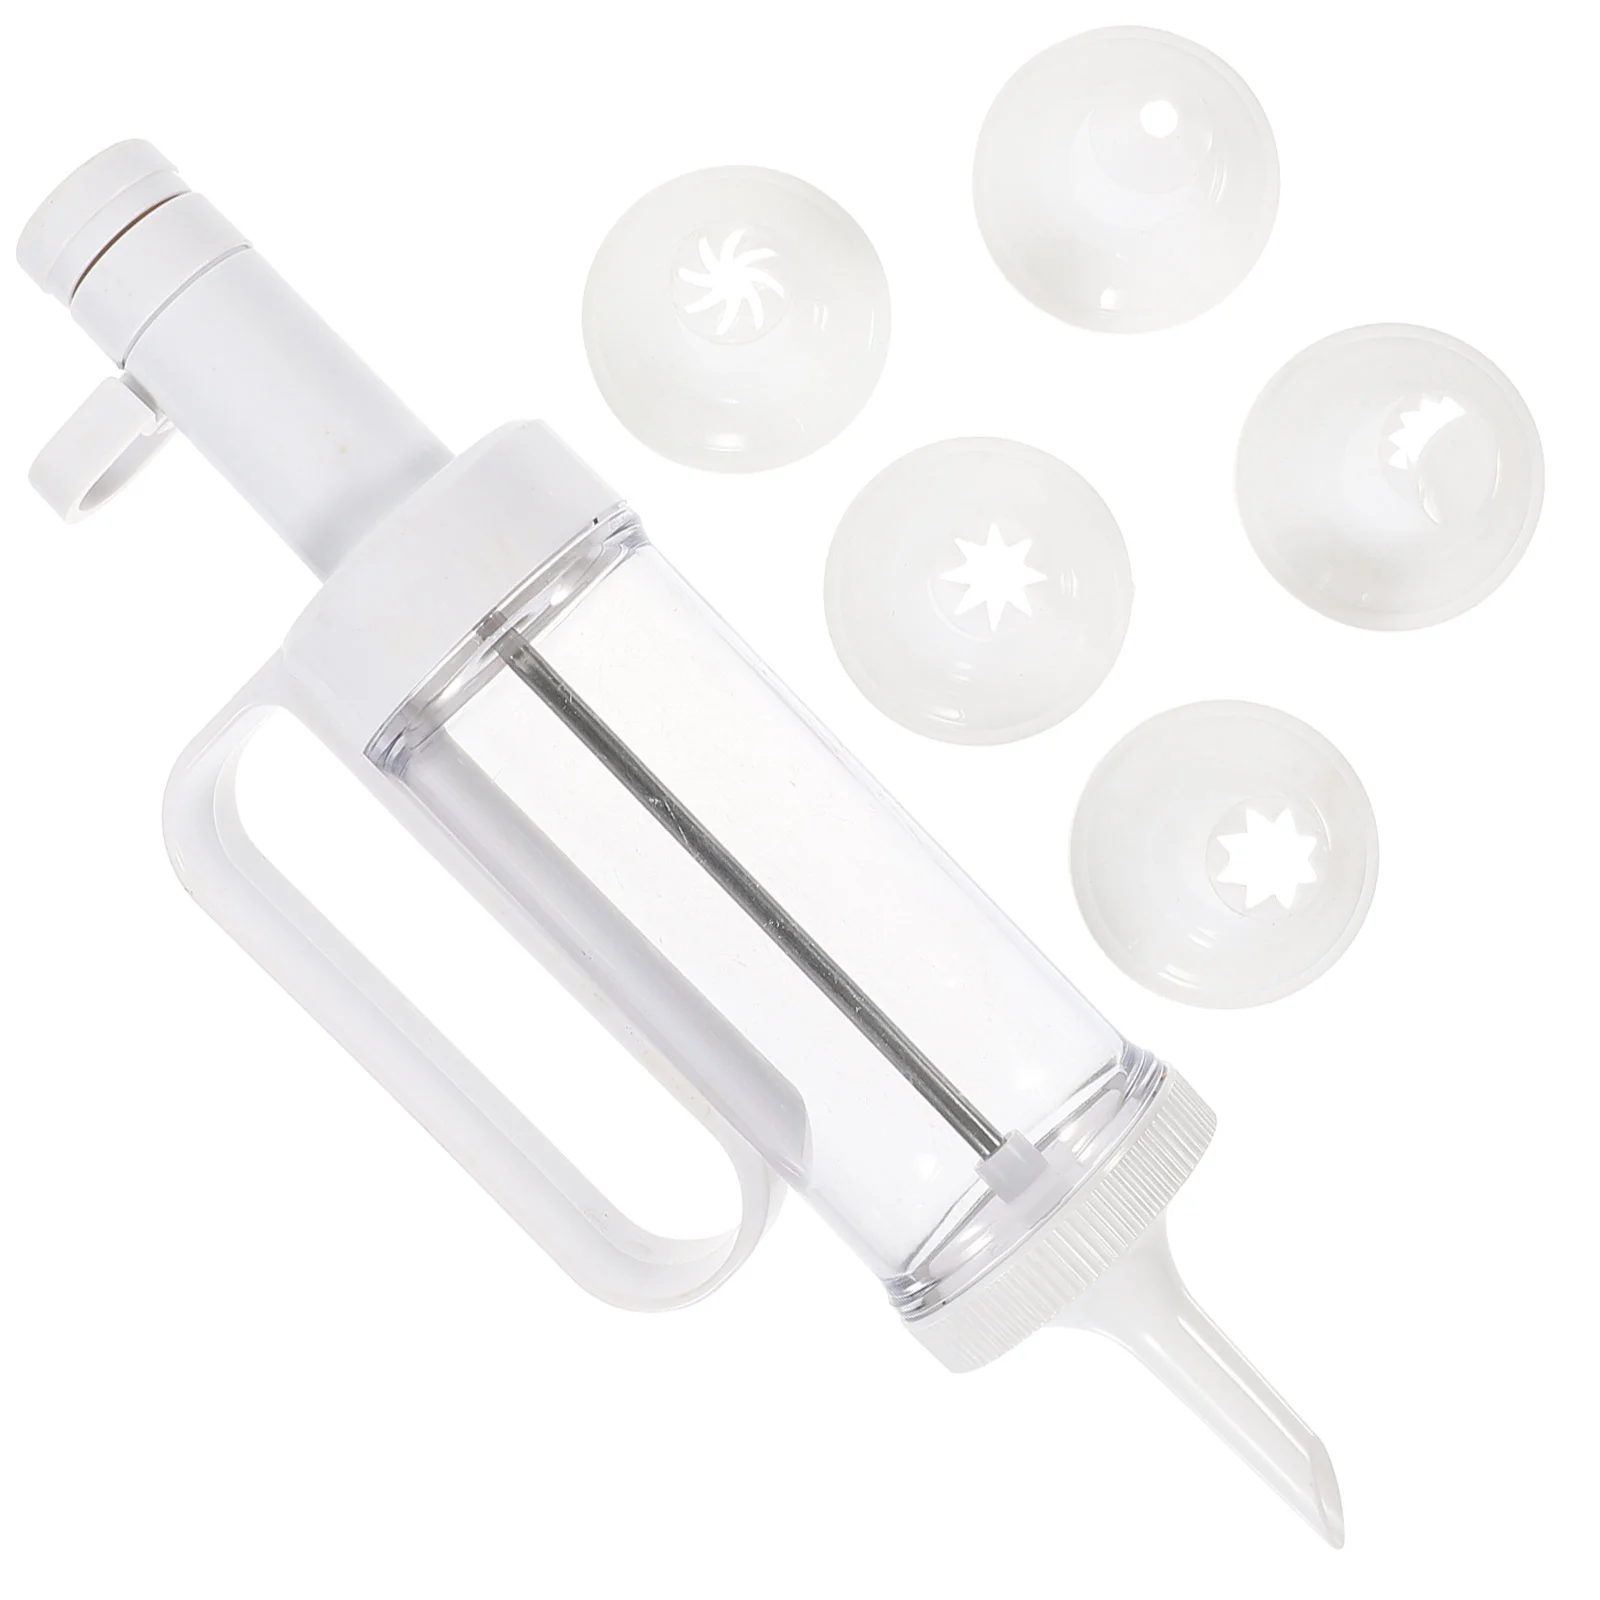 

Cake Decorating Tool Icing Piping Syringe Cupcake Frosting Injector Nozzles Kit Decoration Kitchen Dessert Cookie Maker Baking